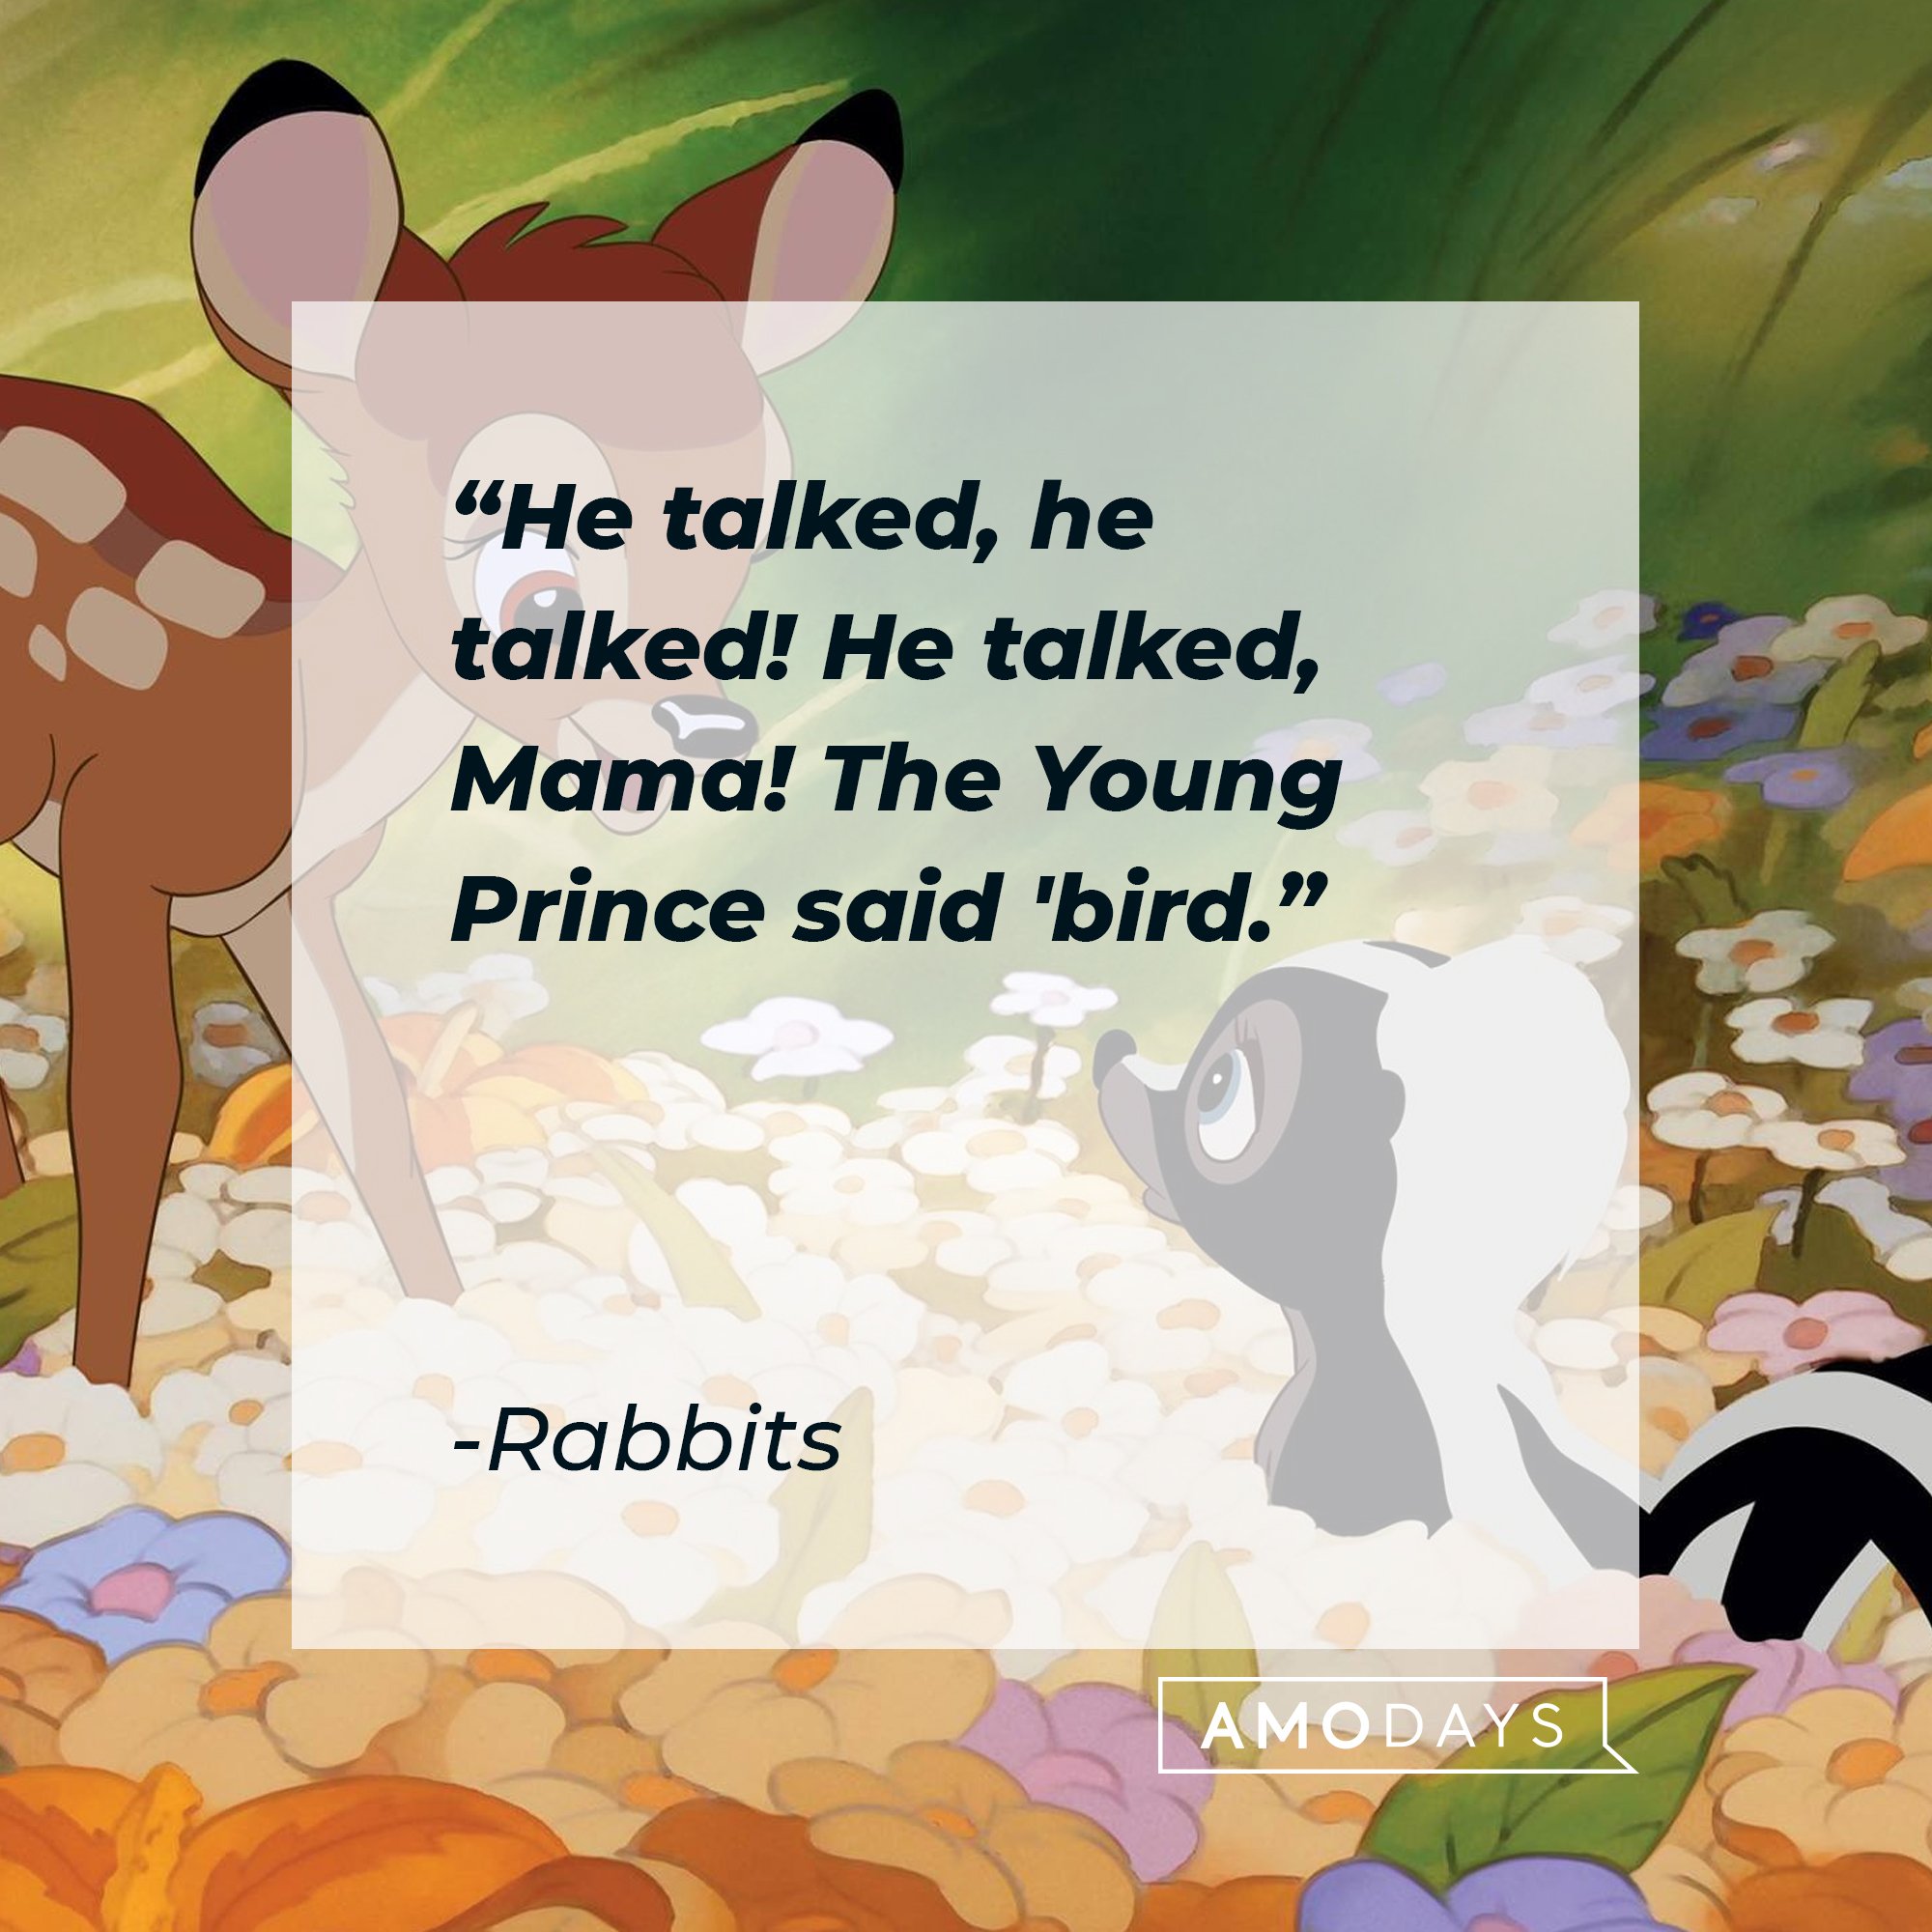 Rabbits's quote "He talked, he talked! He talked, Mama! The Young Prince said 'bird.'" | Source: facebook.com/DisneyBambi